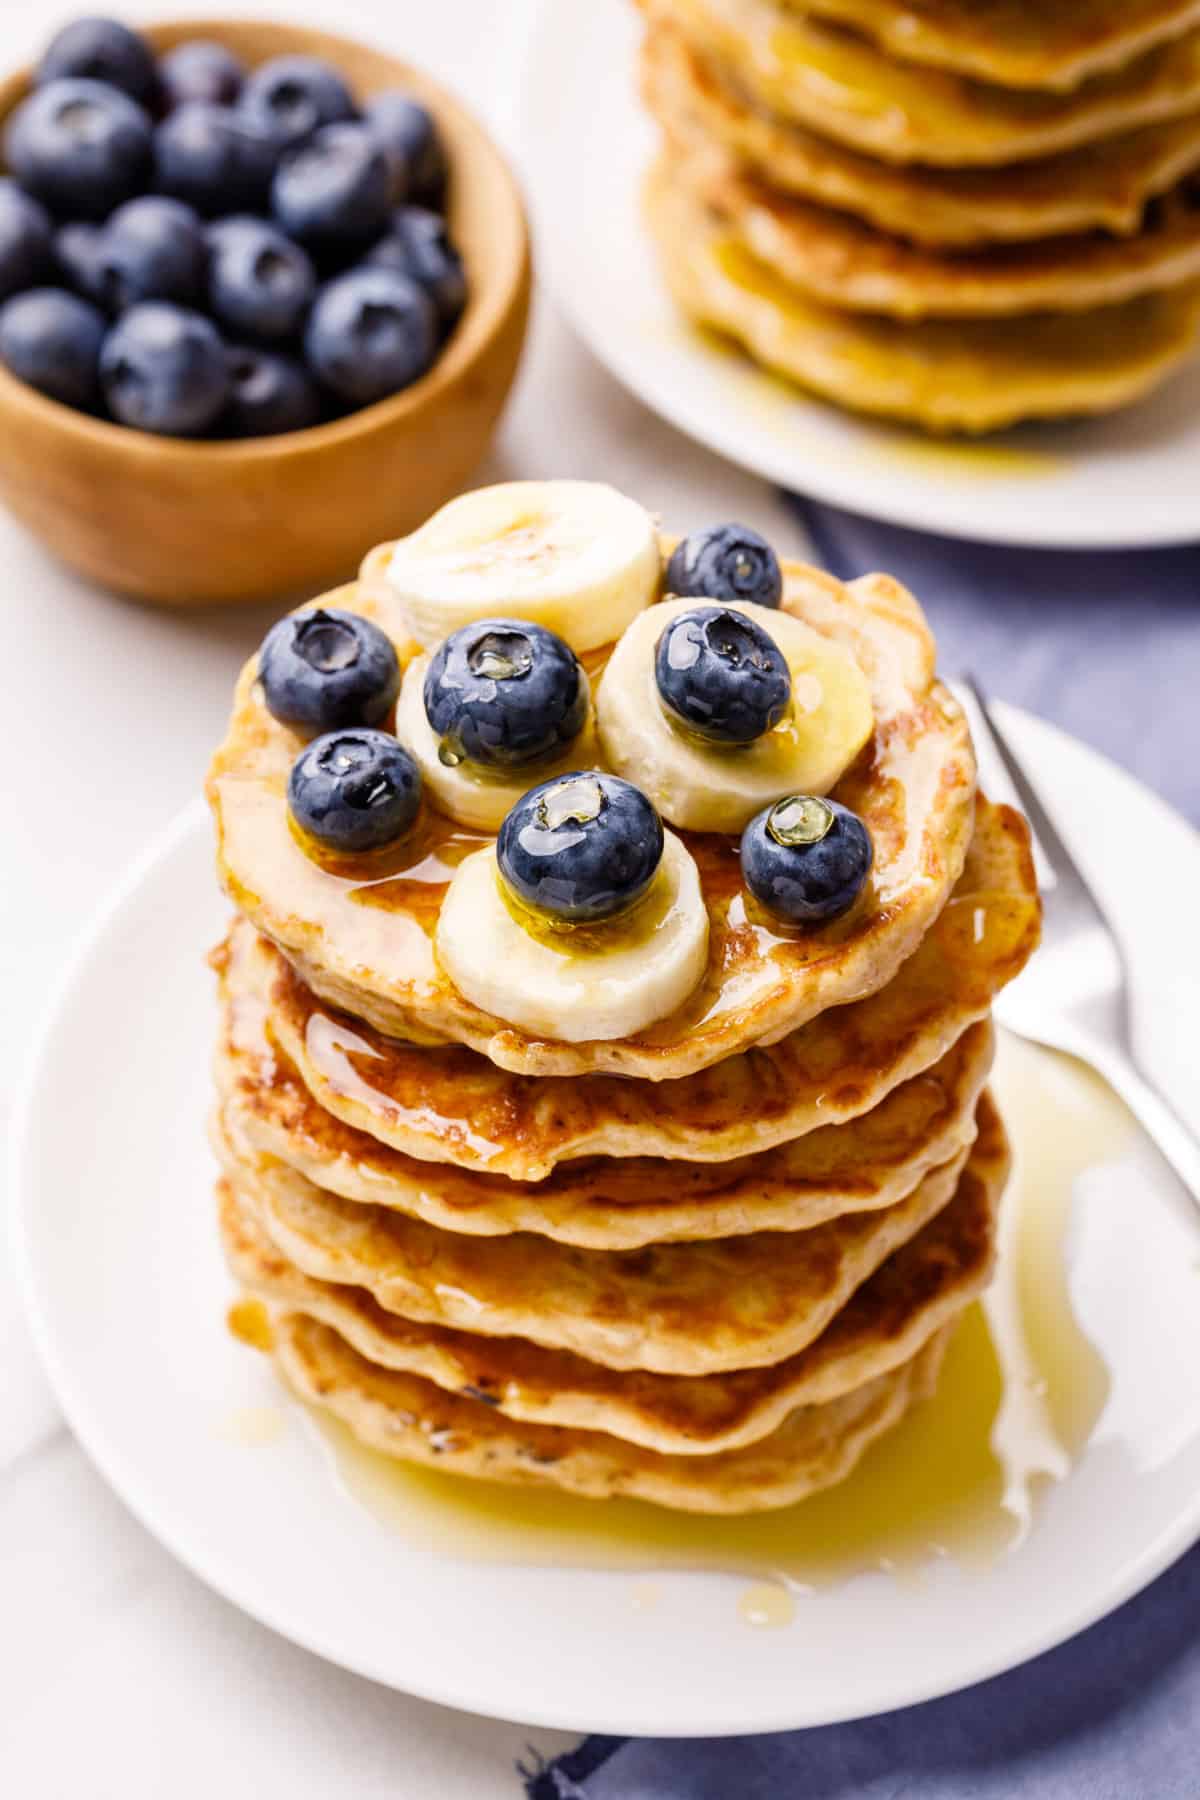 stack of oatmeal pancakes topped with fresh sliced bananas and blueberries with maple syrup, served on a white round plate